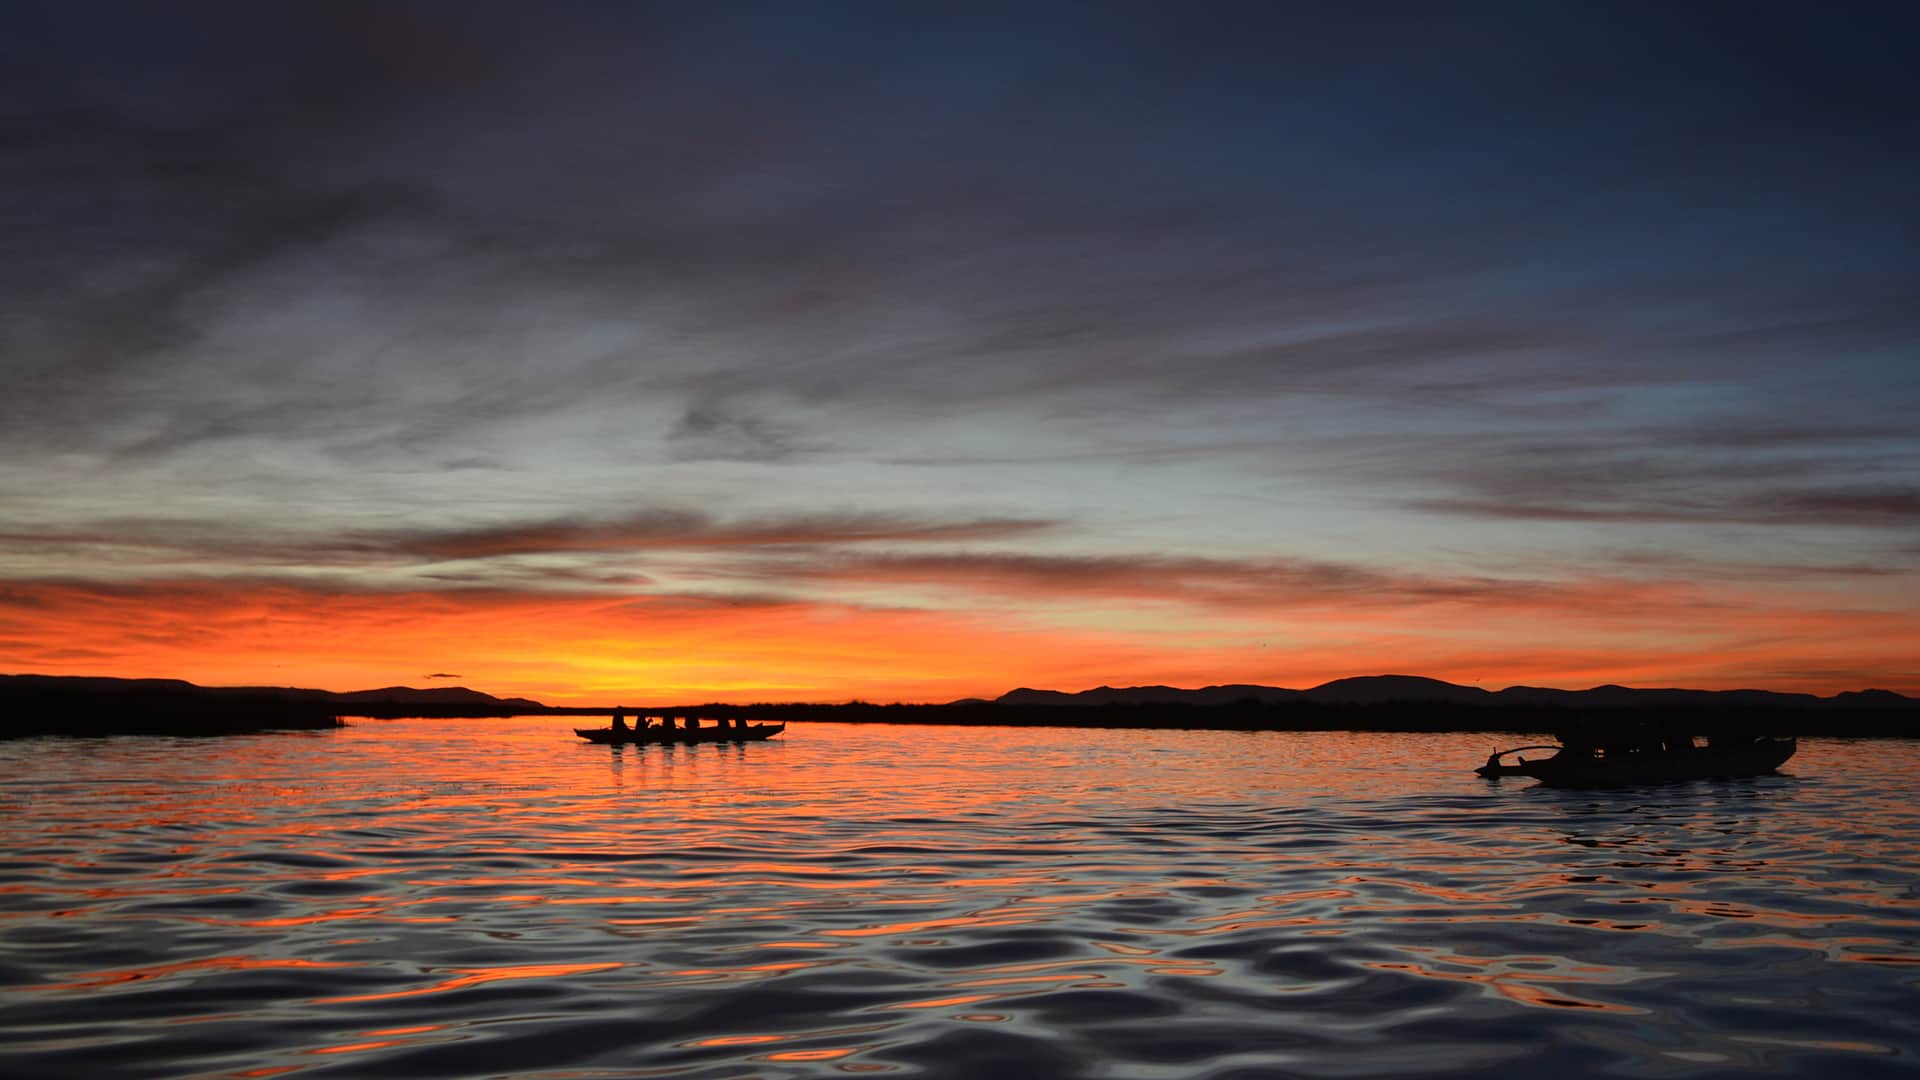 Little silouette of canoe at dusk or dawn | Responsible Travel Peru